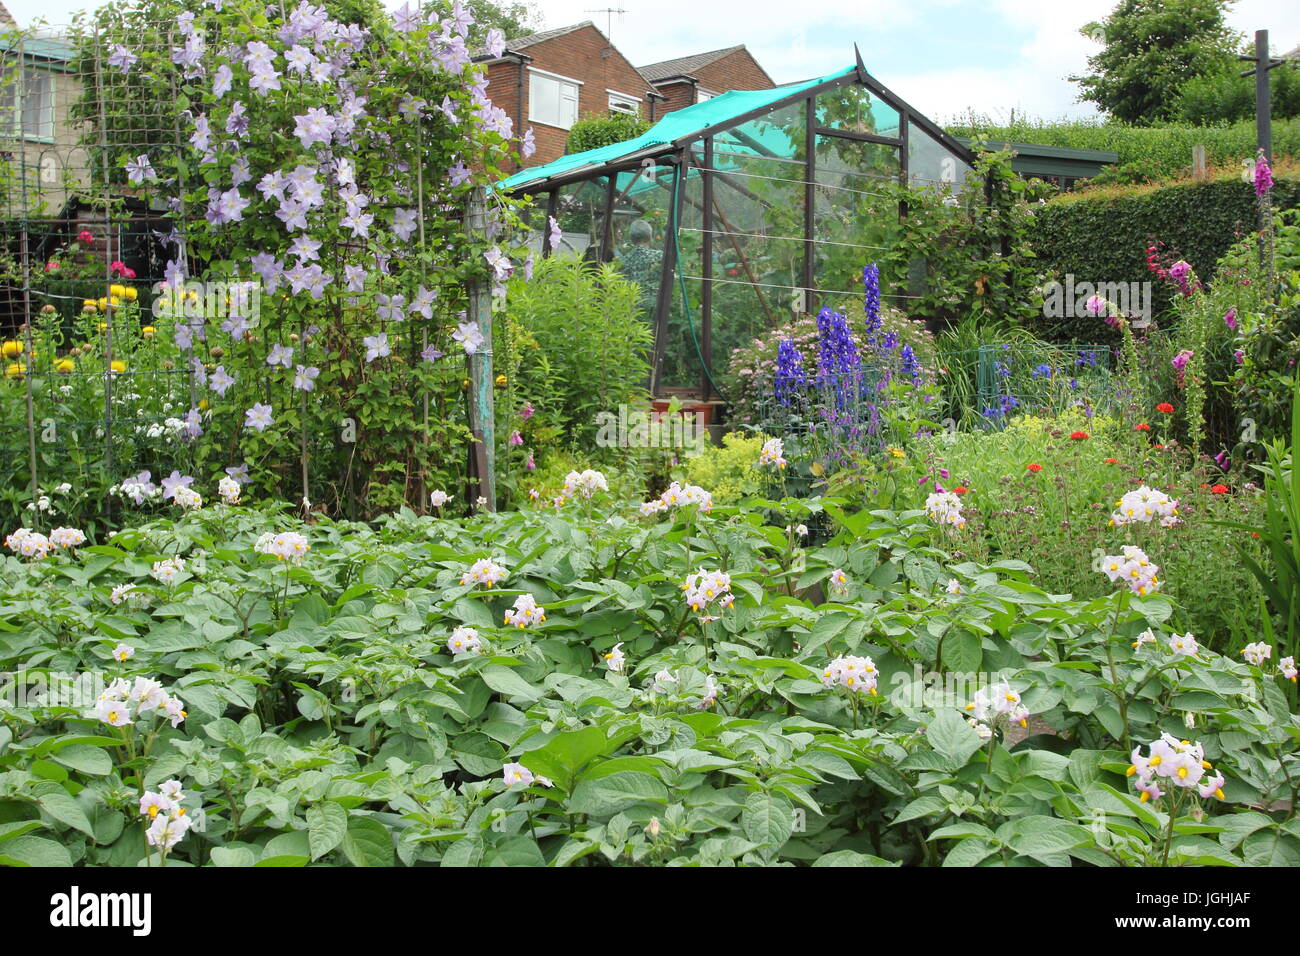 A pristine allotment garden featuring vegetables (desiree potatoes in foreground) and flowers (clematis, foxgloves, delphiniums), - June, Sheffield UK Stock Photo